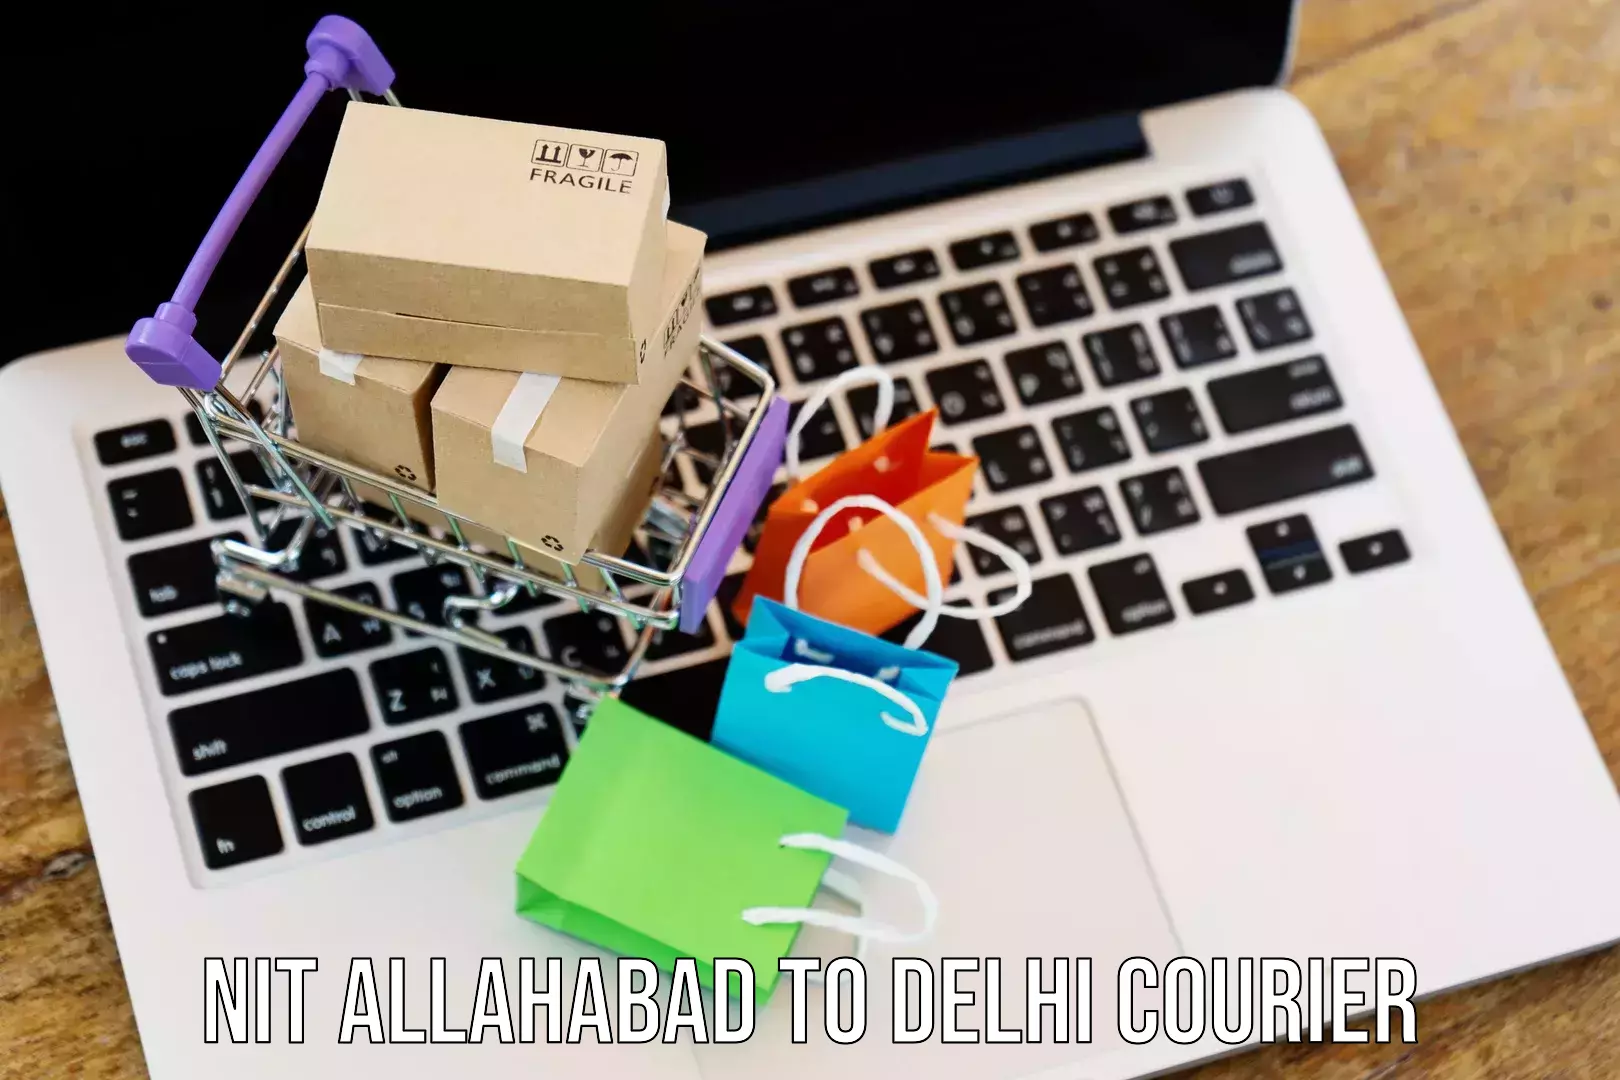 Urban courier service NIT Allahabad to University of Delhi